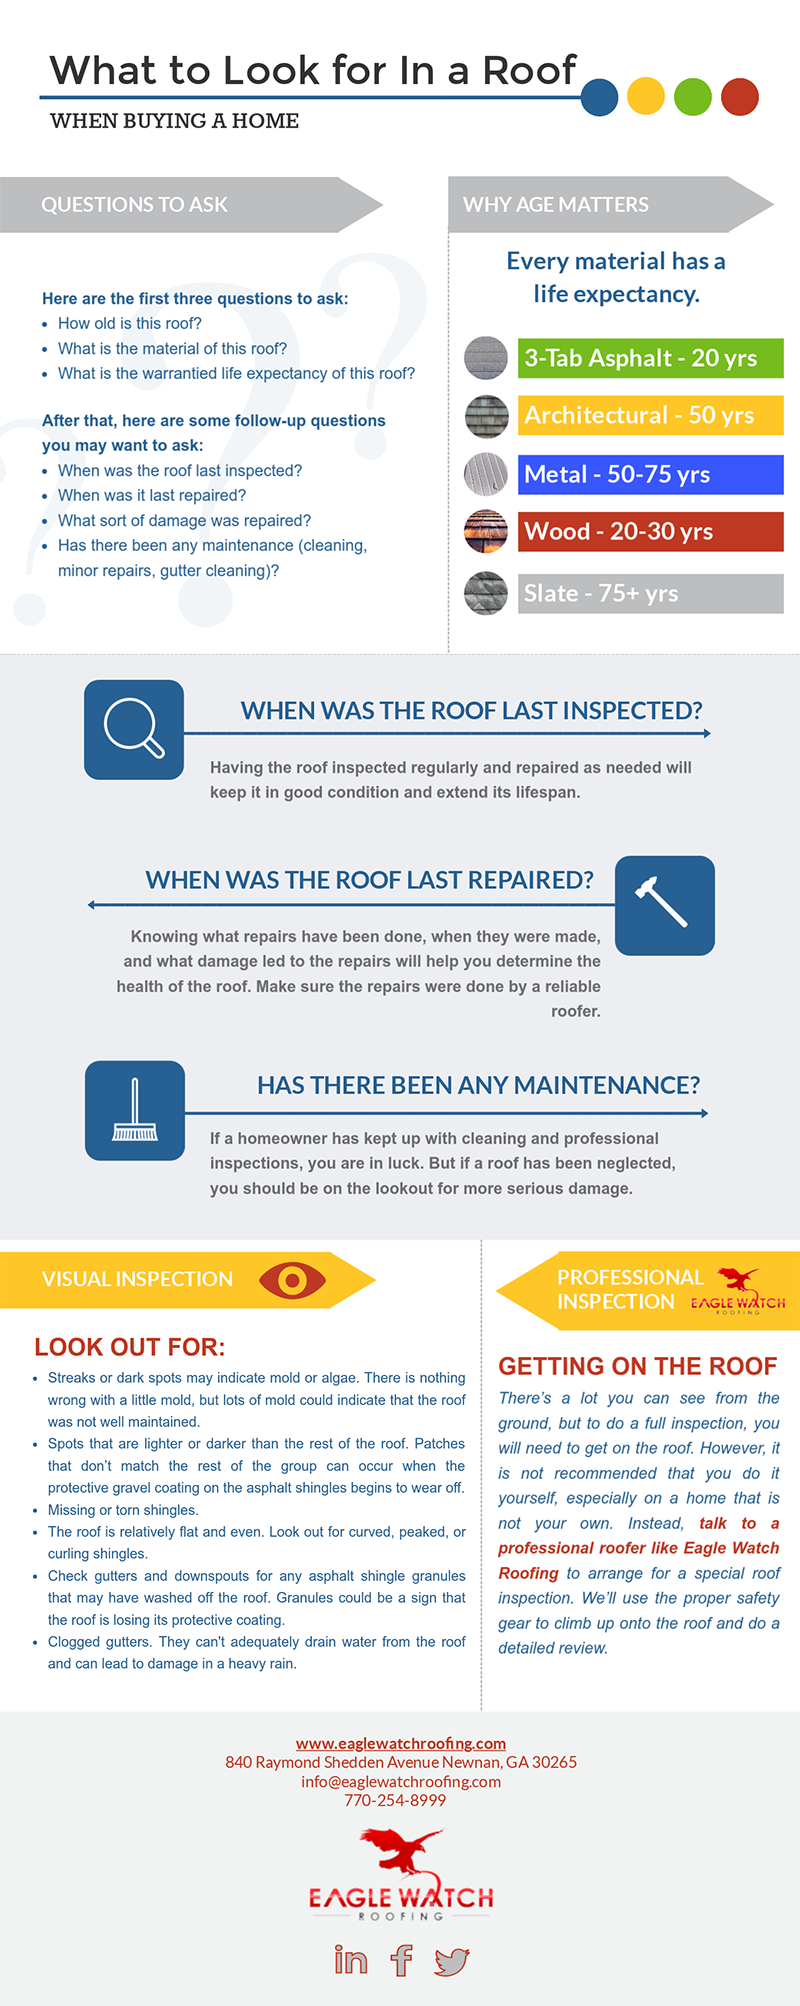 What to Look for In a Roof When Buying a Home [infographic]